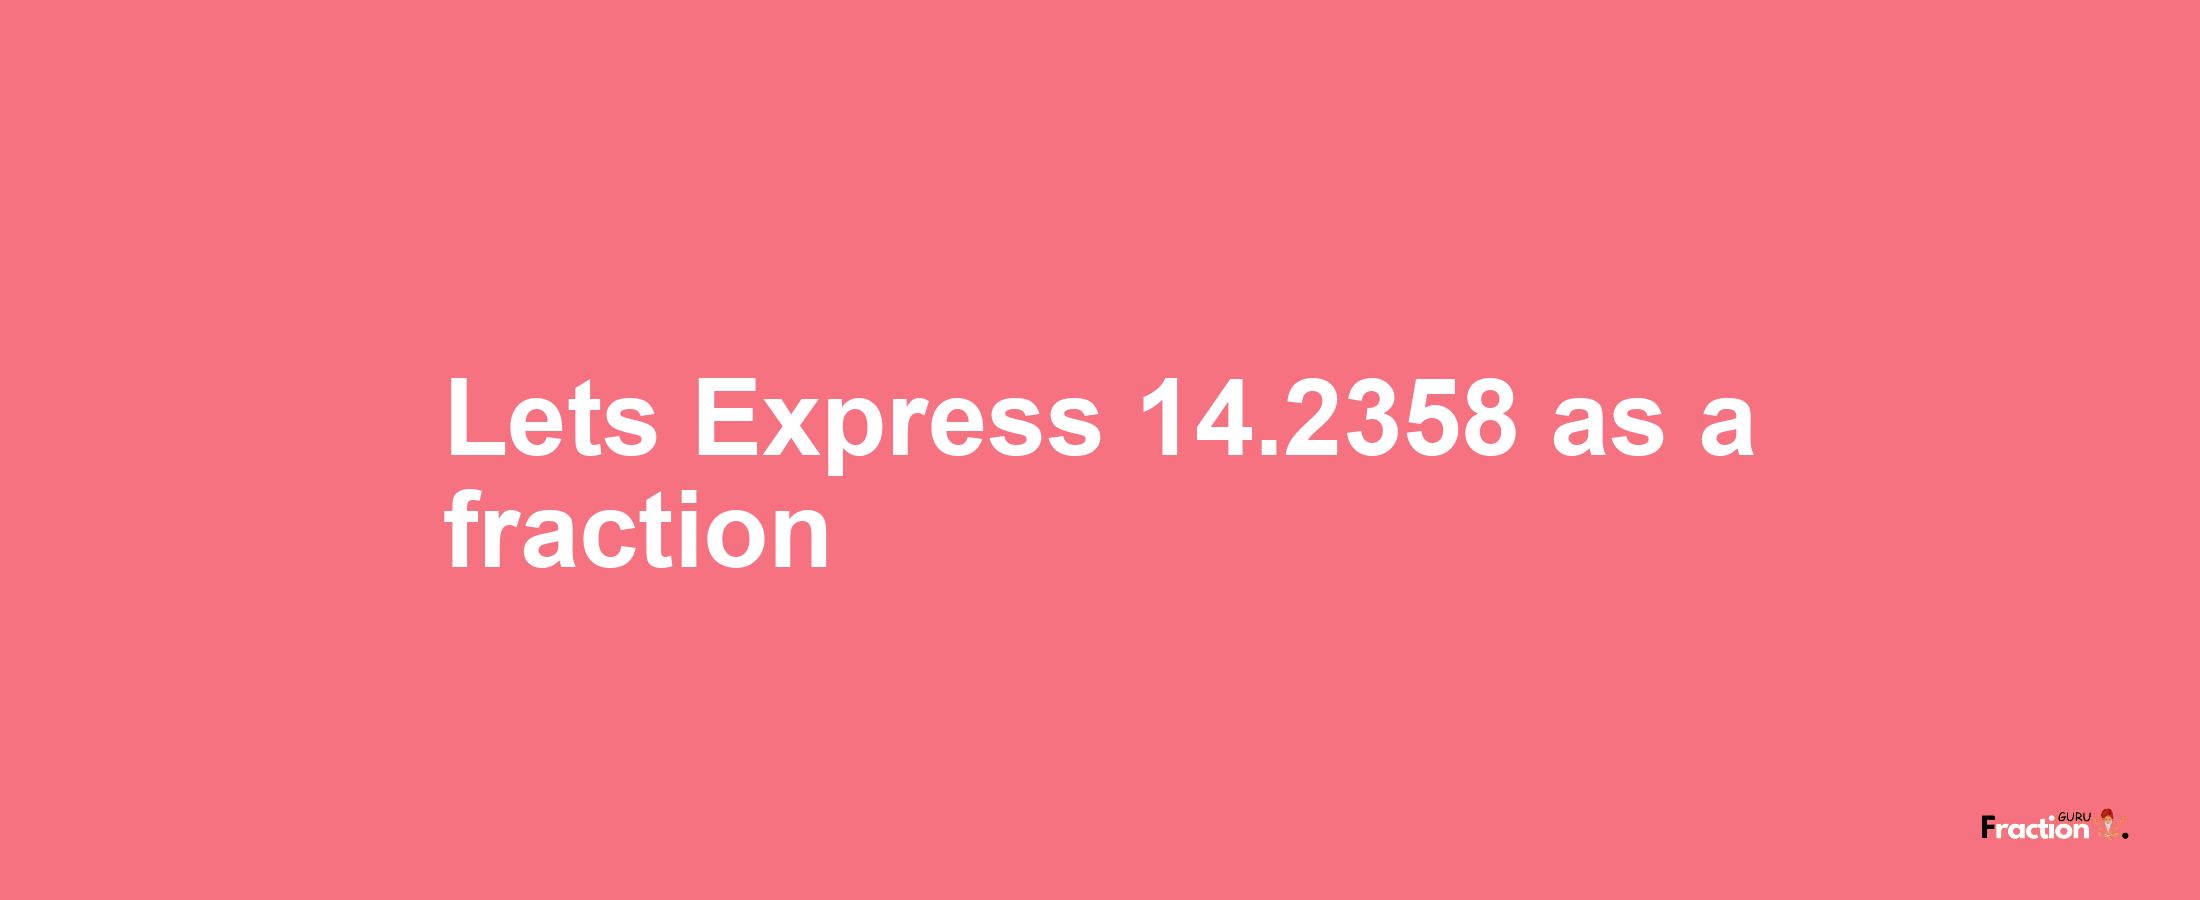 Lets Express 14.2358 as afraction